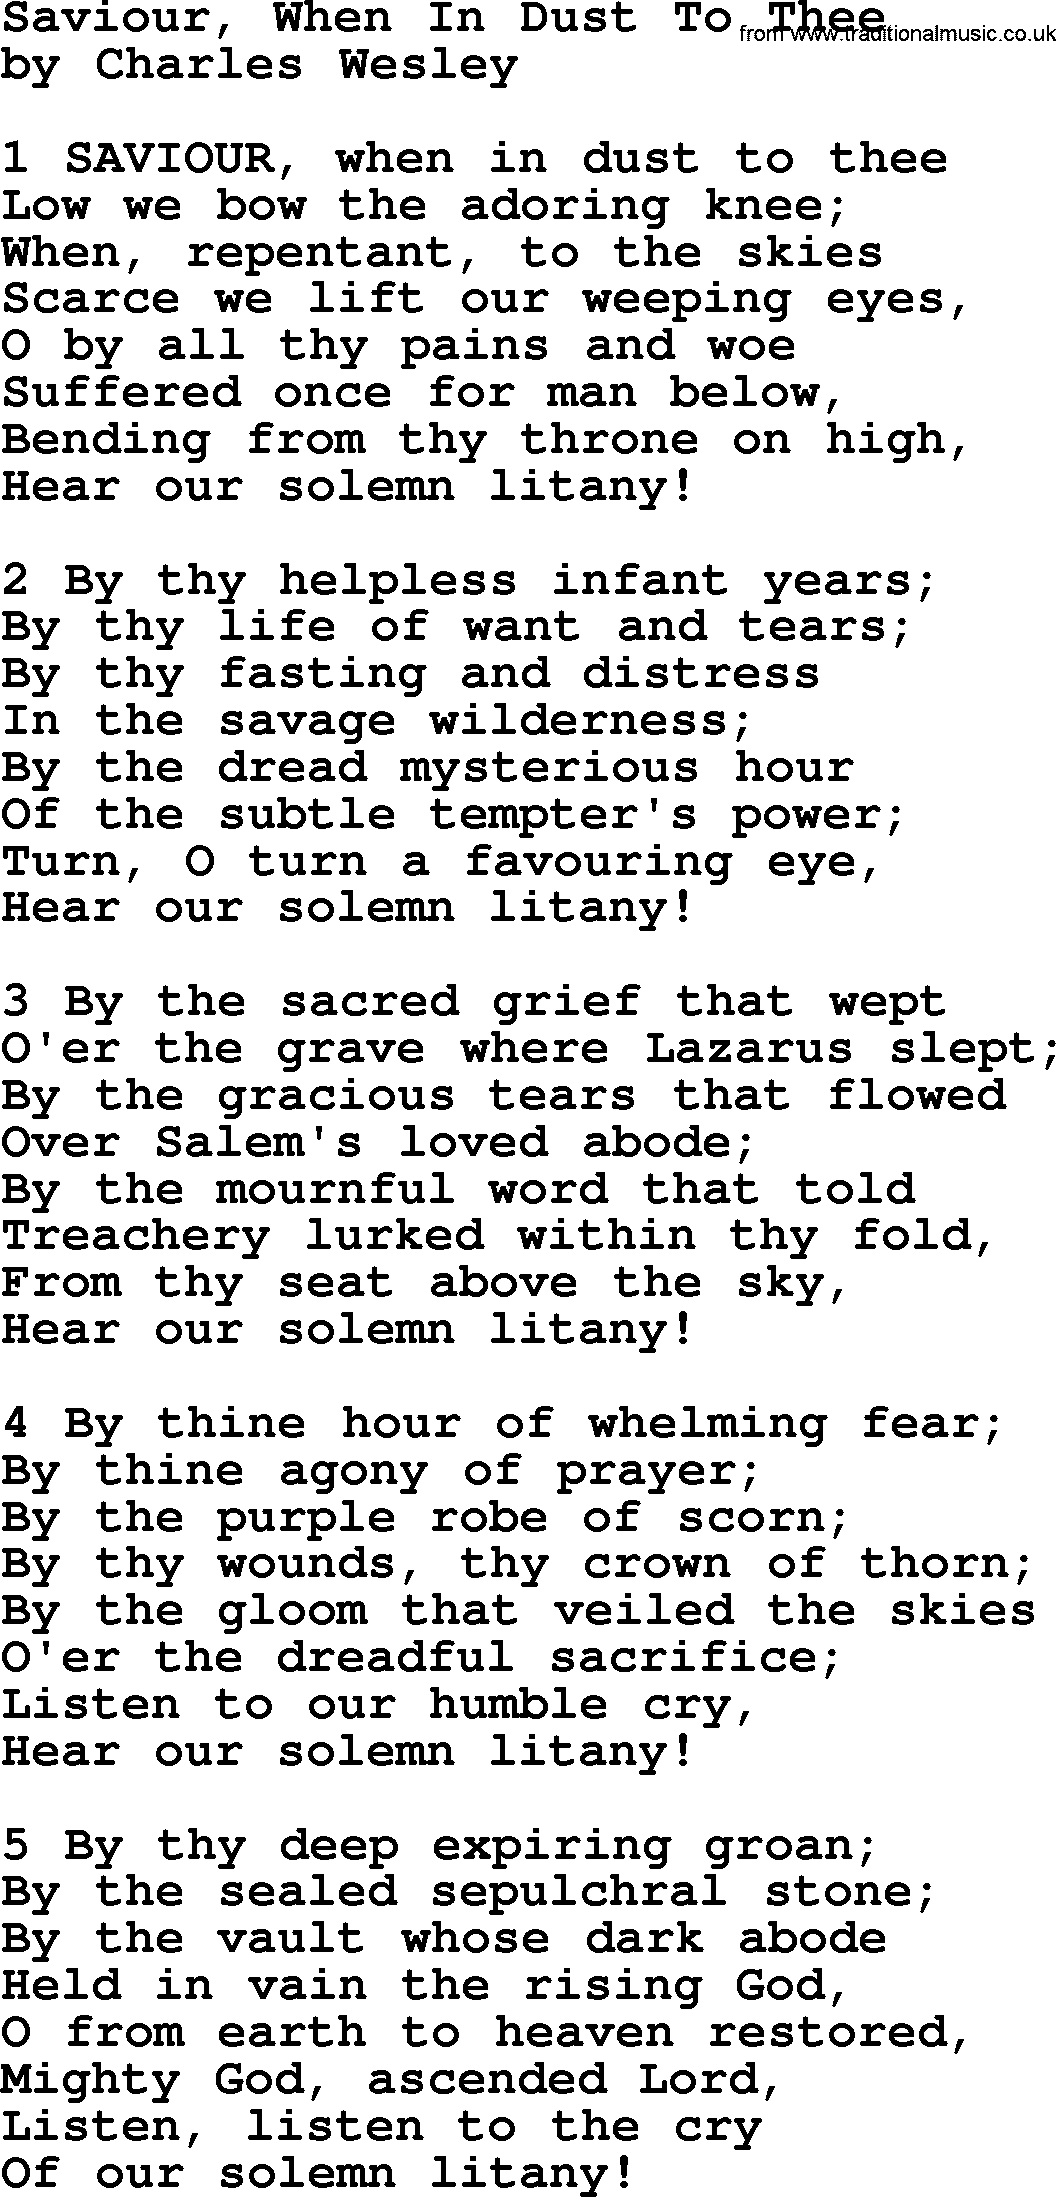 Charles Wesley hymn: Saviour, When In Dust To Thee, lyrics